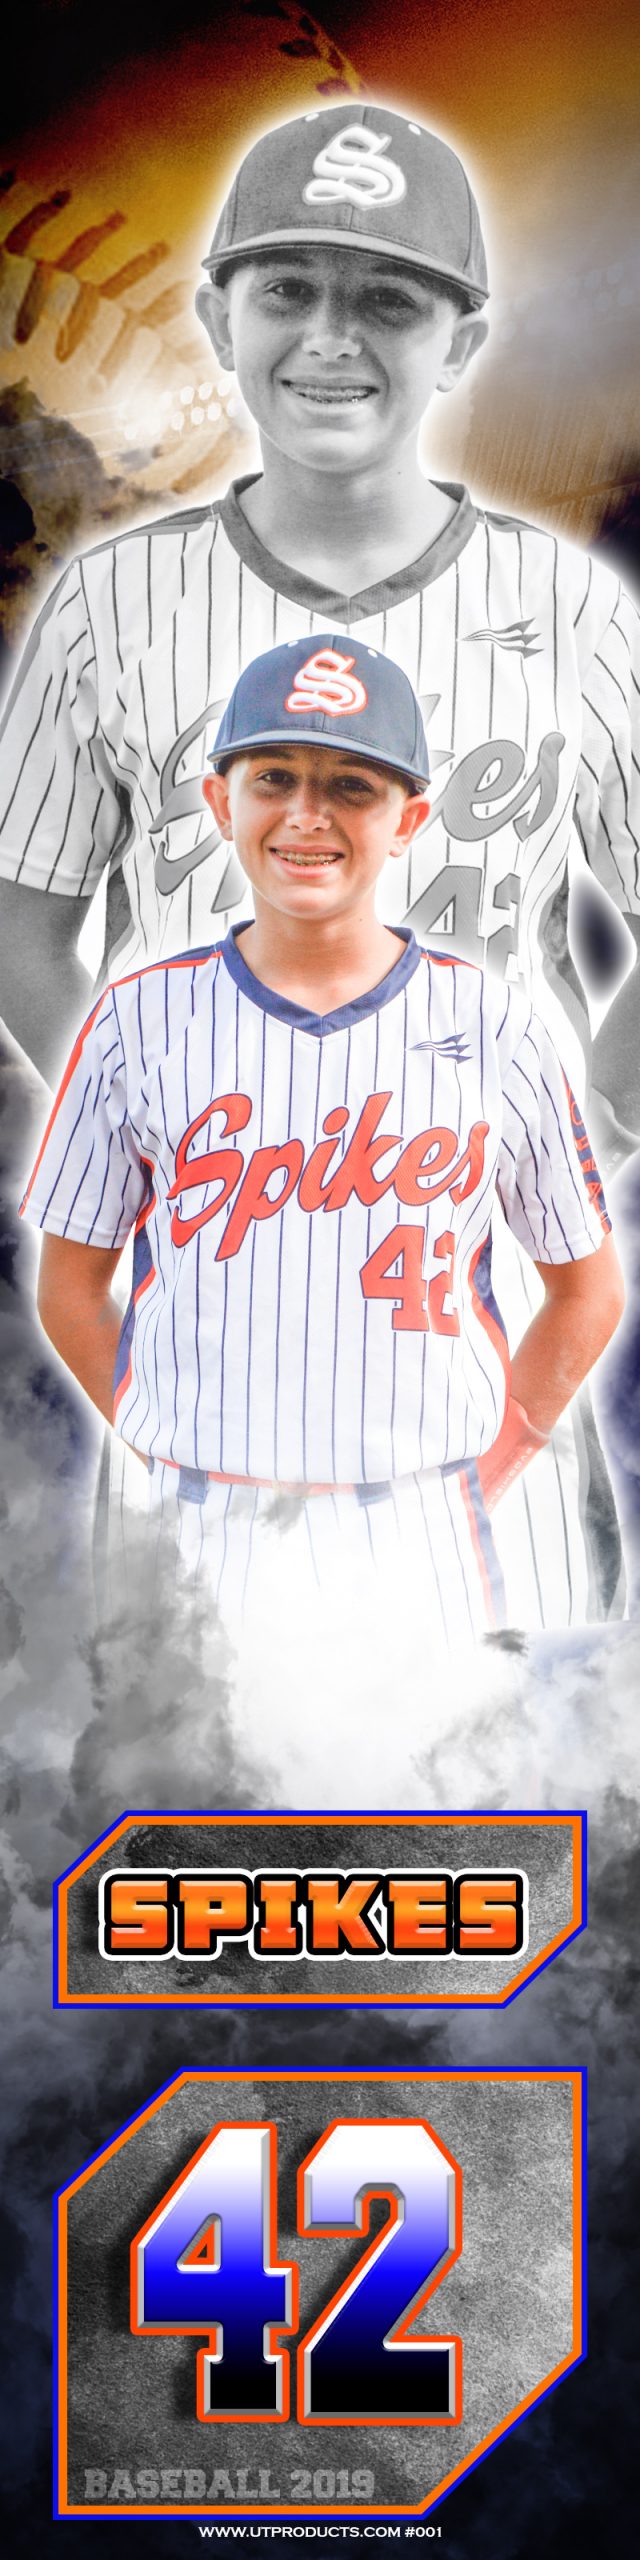 Spikes 42